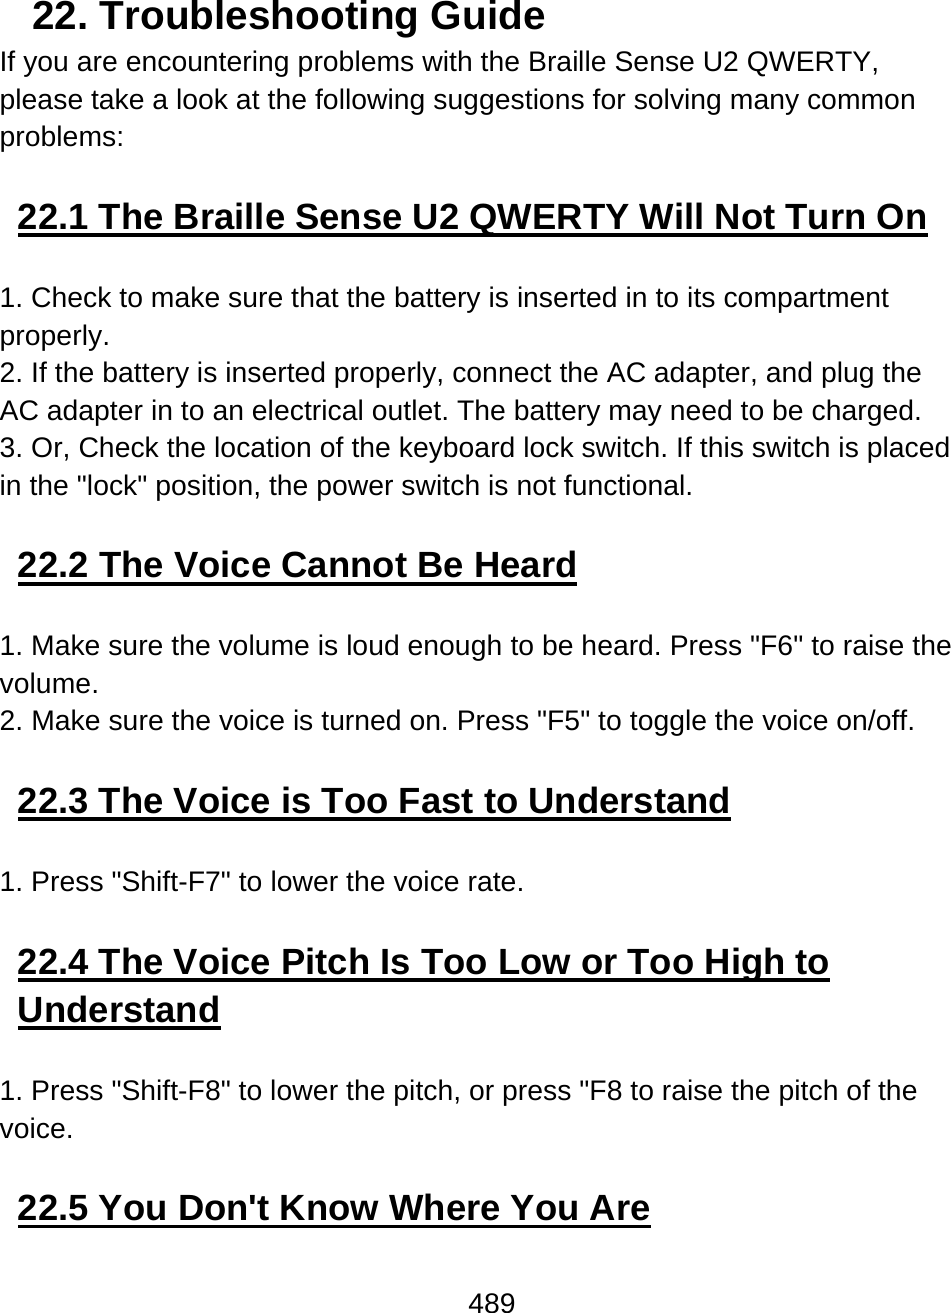 489  22. Troubleshooting Guide If you are encountering problems with the Braille Sense U2 QWERTY, please take a look at the following suggestions for solving many common problems:   22.1 The Braille Sense U2 QWERTY Will Not Turn On  1. Check to make sure that the battery is inserted in to its compartment properly. 2. If the battery is inserted properly, connect the AC adapter, and plug the AC adapter in to an electrical outlet. The battery may need to be charged. 3. Or, Check the location of the keyboard lock switch. If this switch is placed in the &quot;lock&quot; position, the power switch is not functional.  22.2 The Voice Cannot Be Heard  1. Make sure the volume is loud enough to be heard. Press &quot;F6&quot; to raise the volume. 2. Make sure the voice is turned on. Press &quot;F5&quot; to toggle the voice on/off.  22.3 The Voice is Too Fast to Understand  1. Press &quot;Shift-F7&quot; to lower the voice rate.  22.4 The Voice Pitch Is Too Low or Too High to Understand  1. Press &quot;Shift-F8&quot; to lower the pitch, or press &quot;F8 to raise the pitch of the voice.  22.5 You Don&apos;t Know Where You Are  